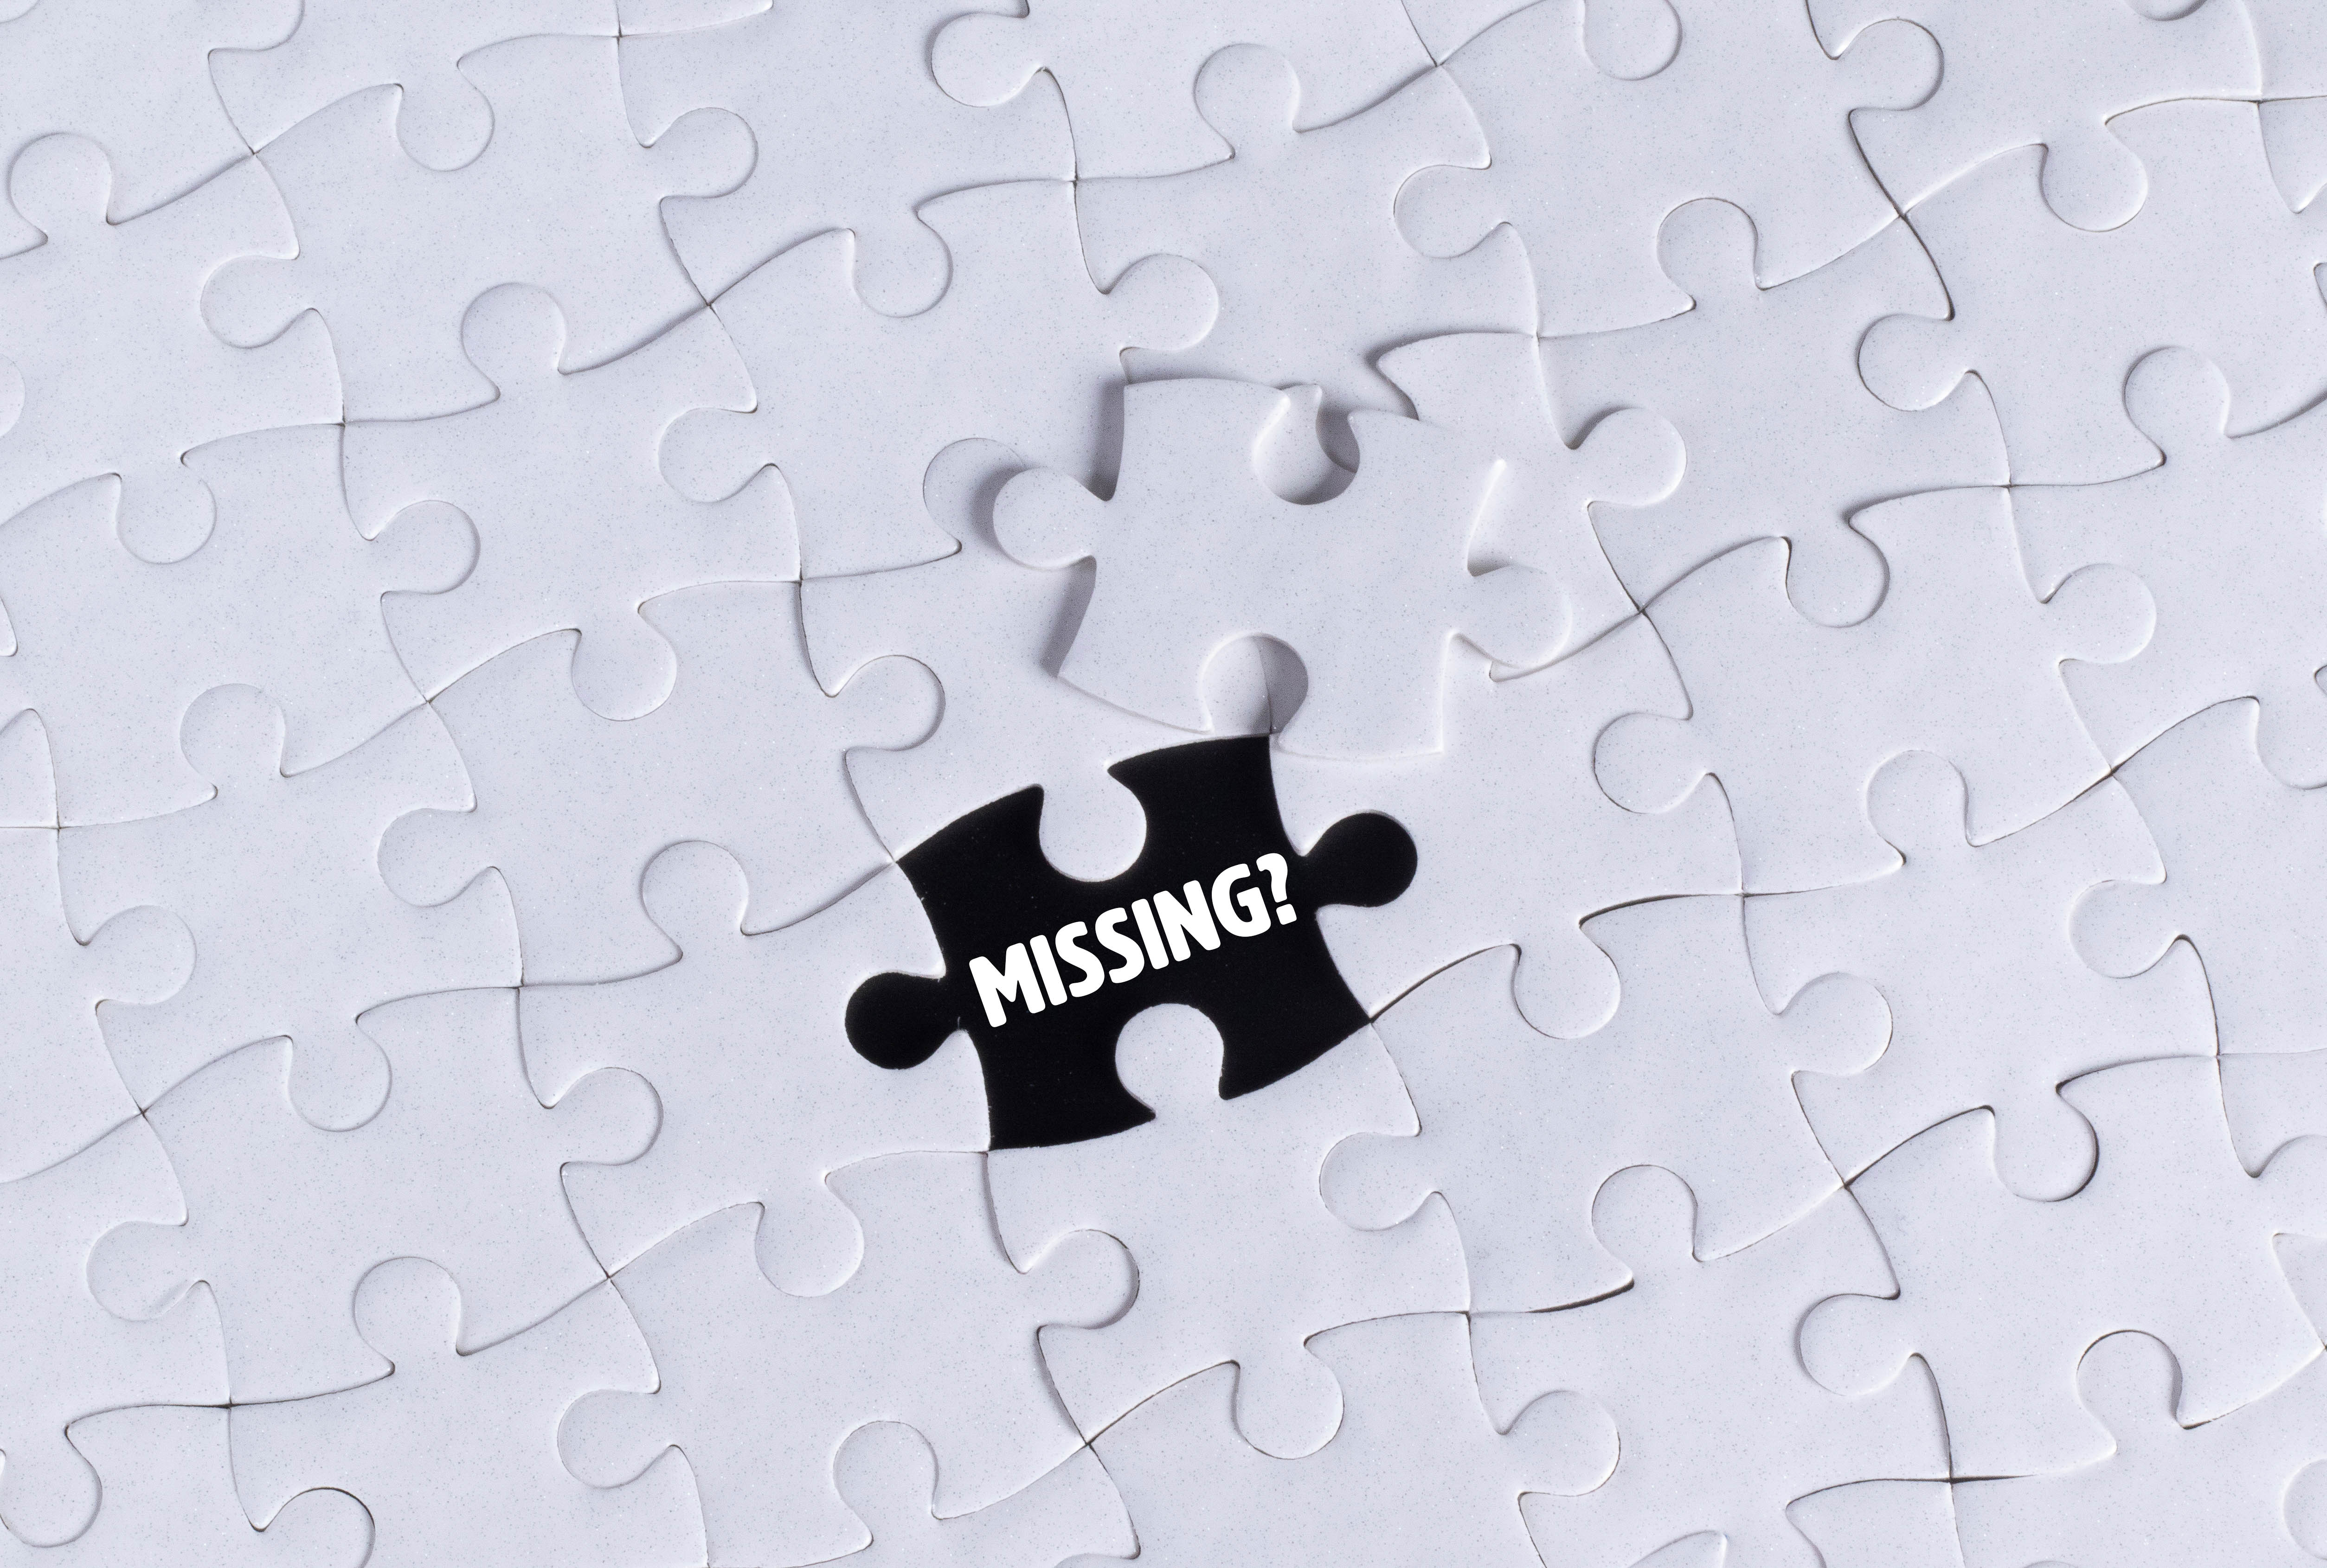 word, words, question, puzzle, jigsaw, missing